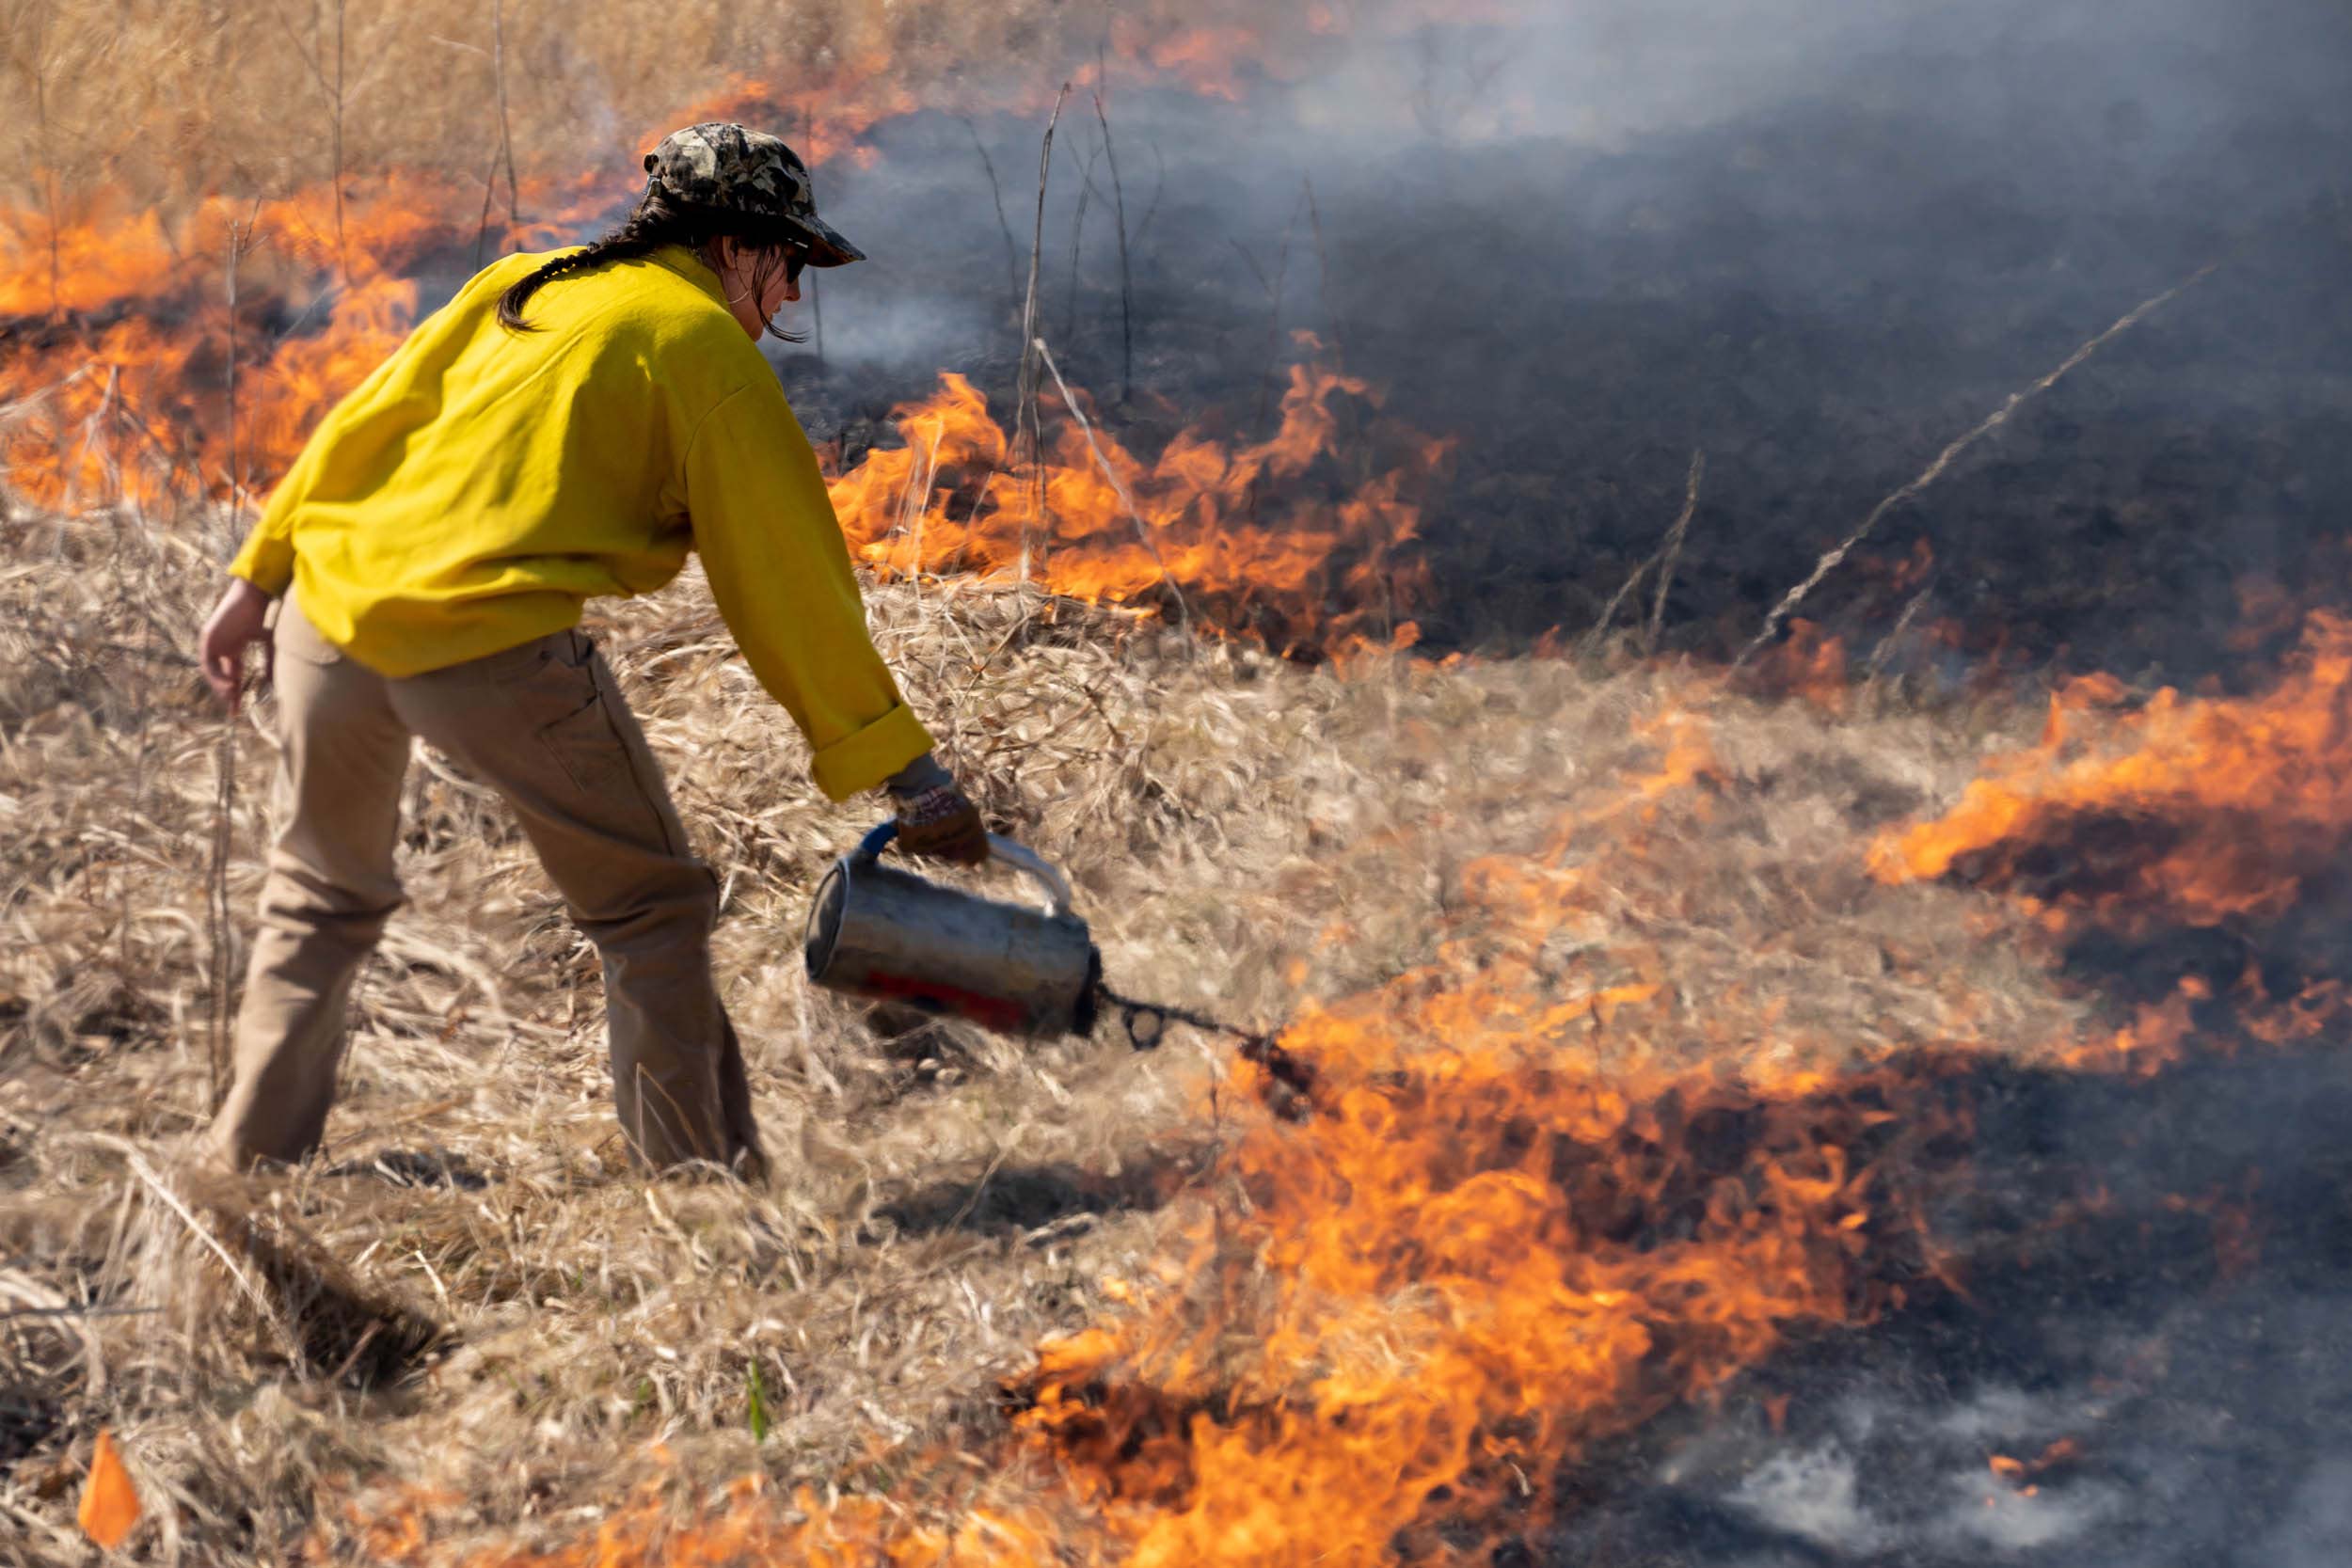 A woman pours burning fuel at the fiery edge of a field of burnt thatch